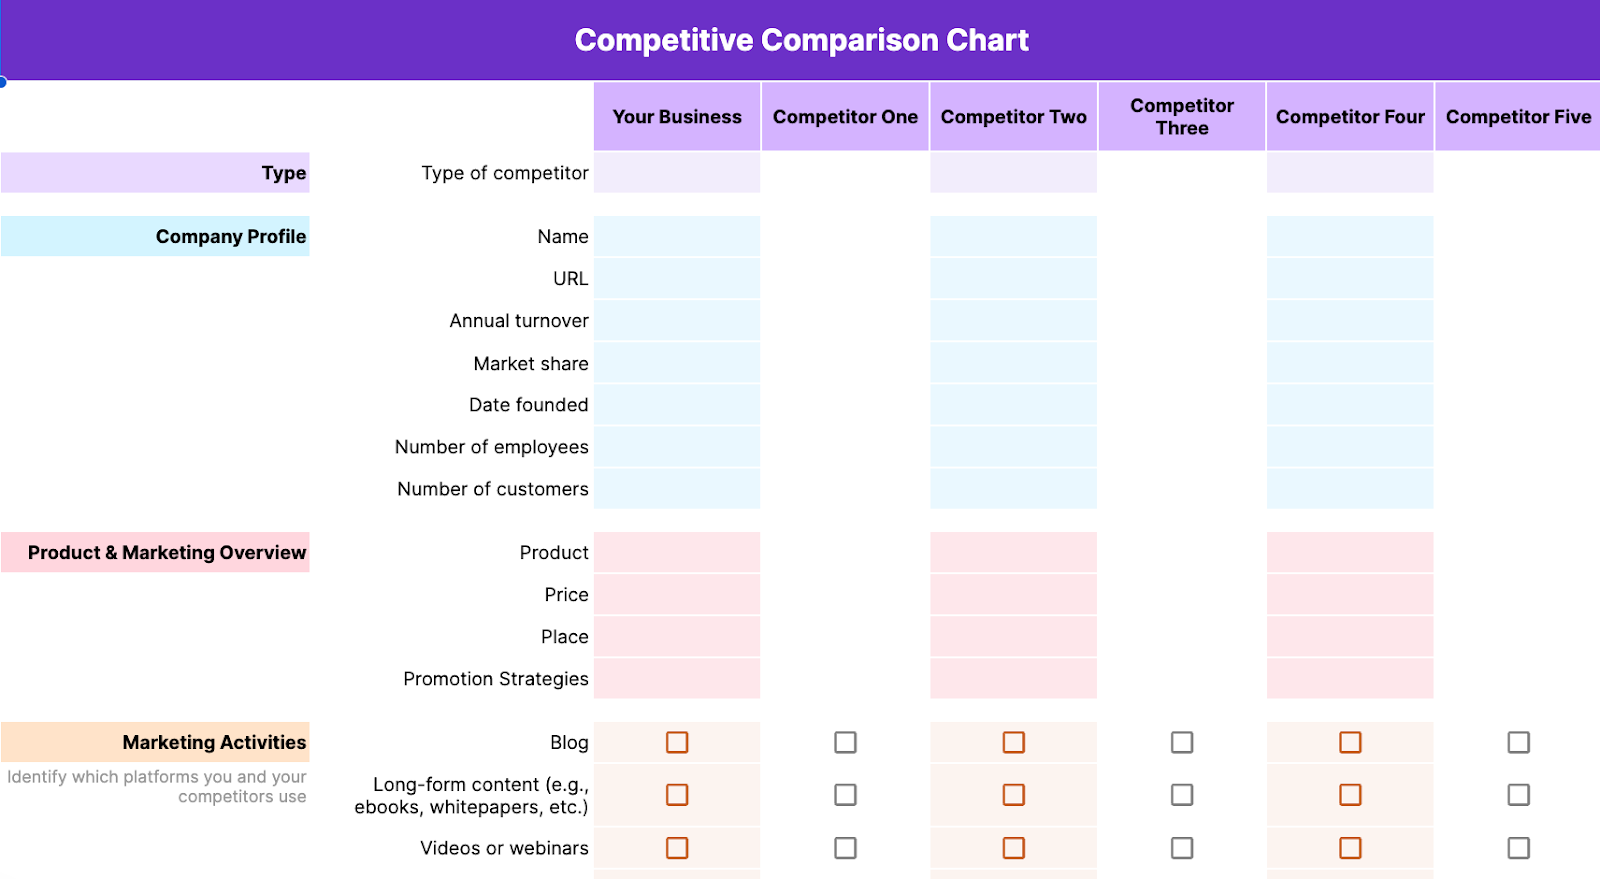 Sample competitive comparison chart to evaluate a business alongside competitors